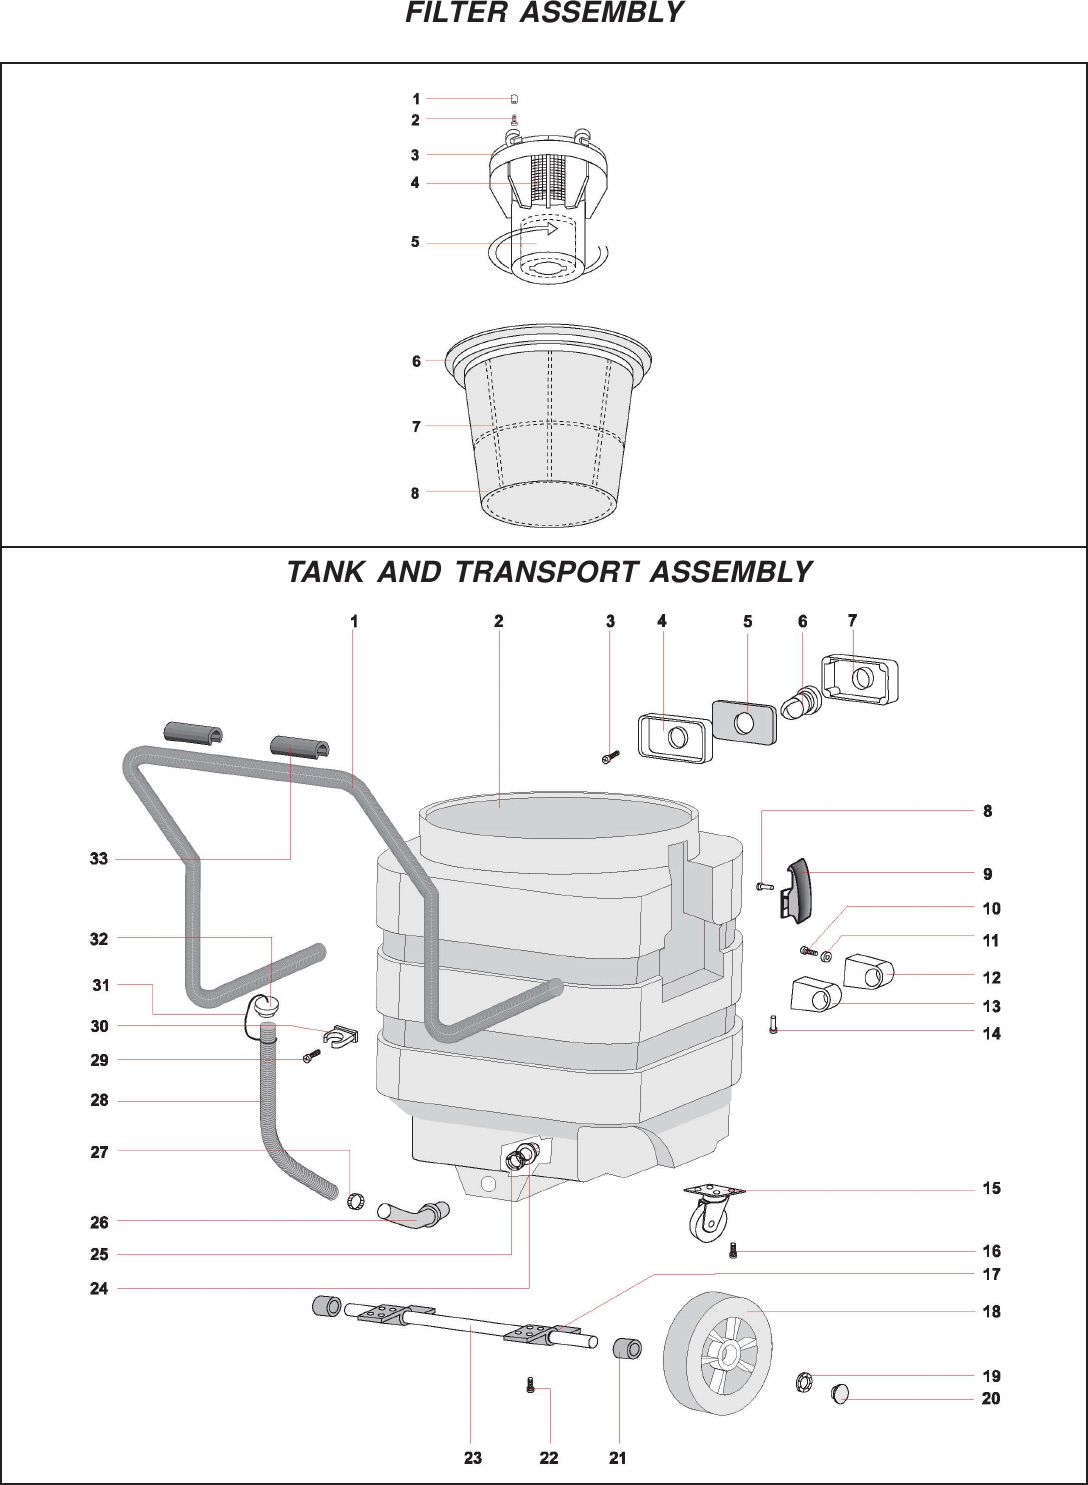 Page 5 of 8 - 9095715 Designer 16 Illustrated Parts Book Orig-1_10-07_pcn_11701.pmd  Nss-designer-16-wet-dry-vac-parts-manual